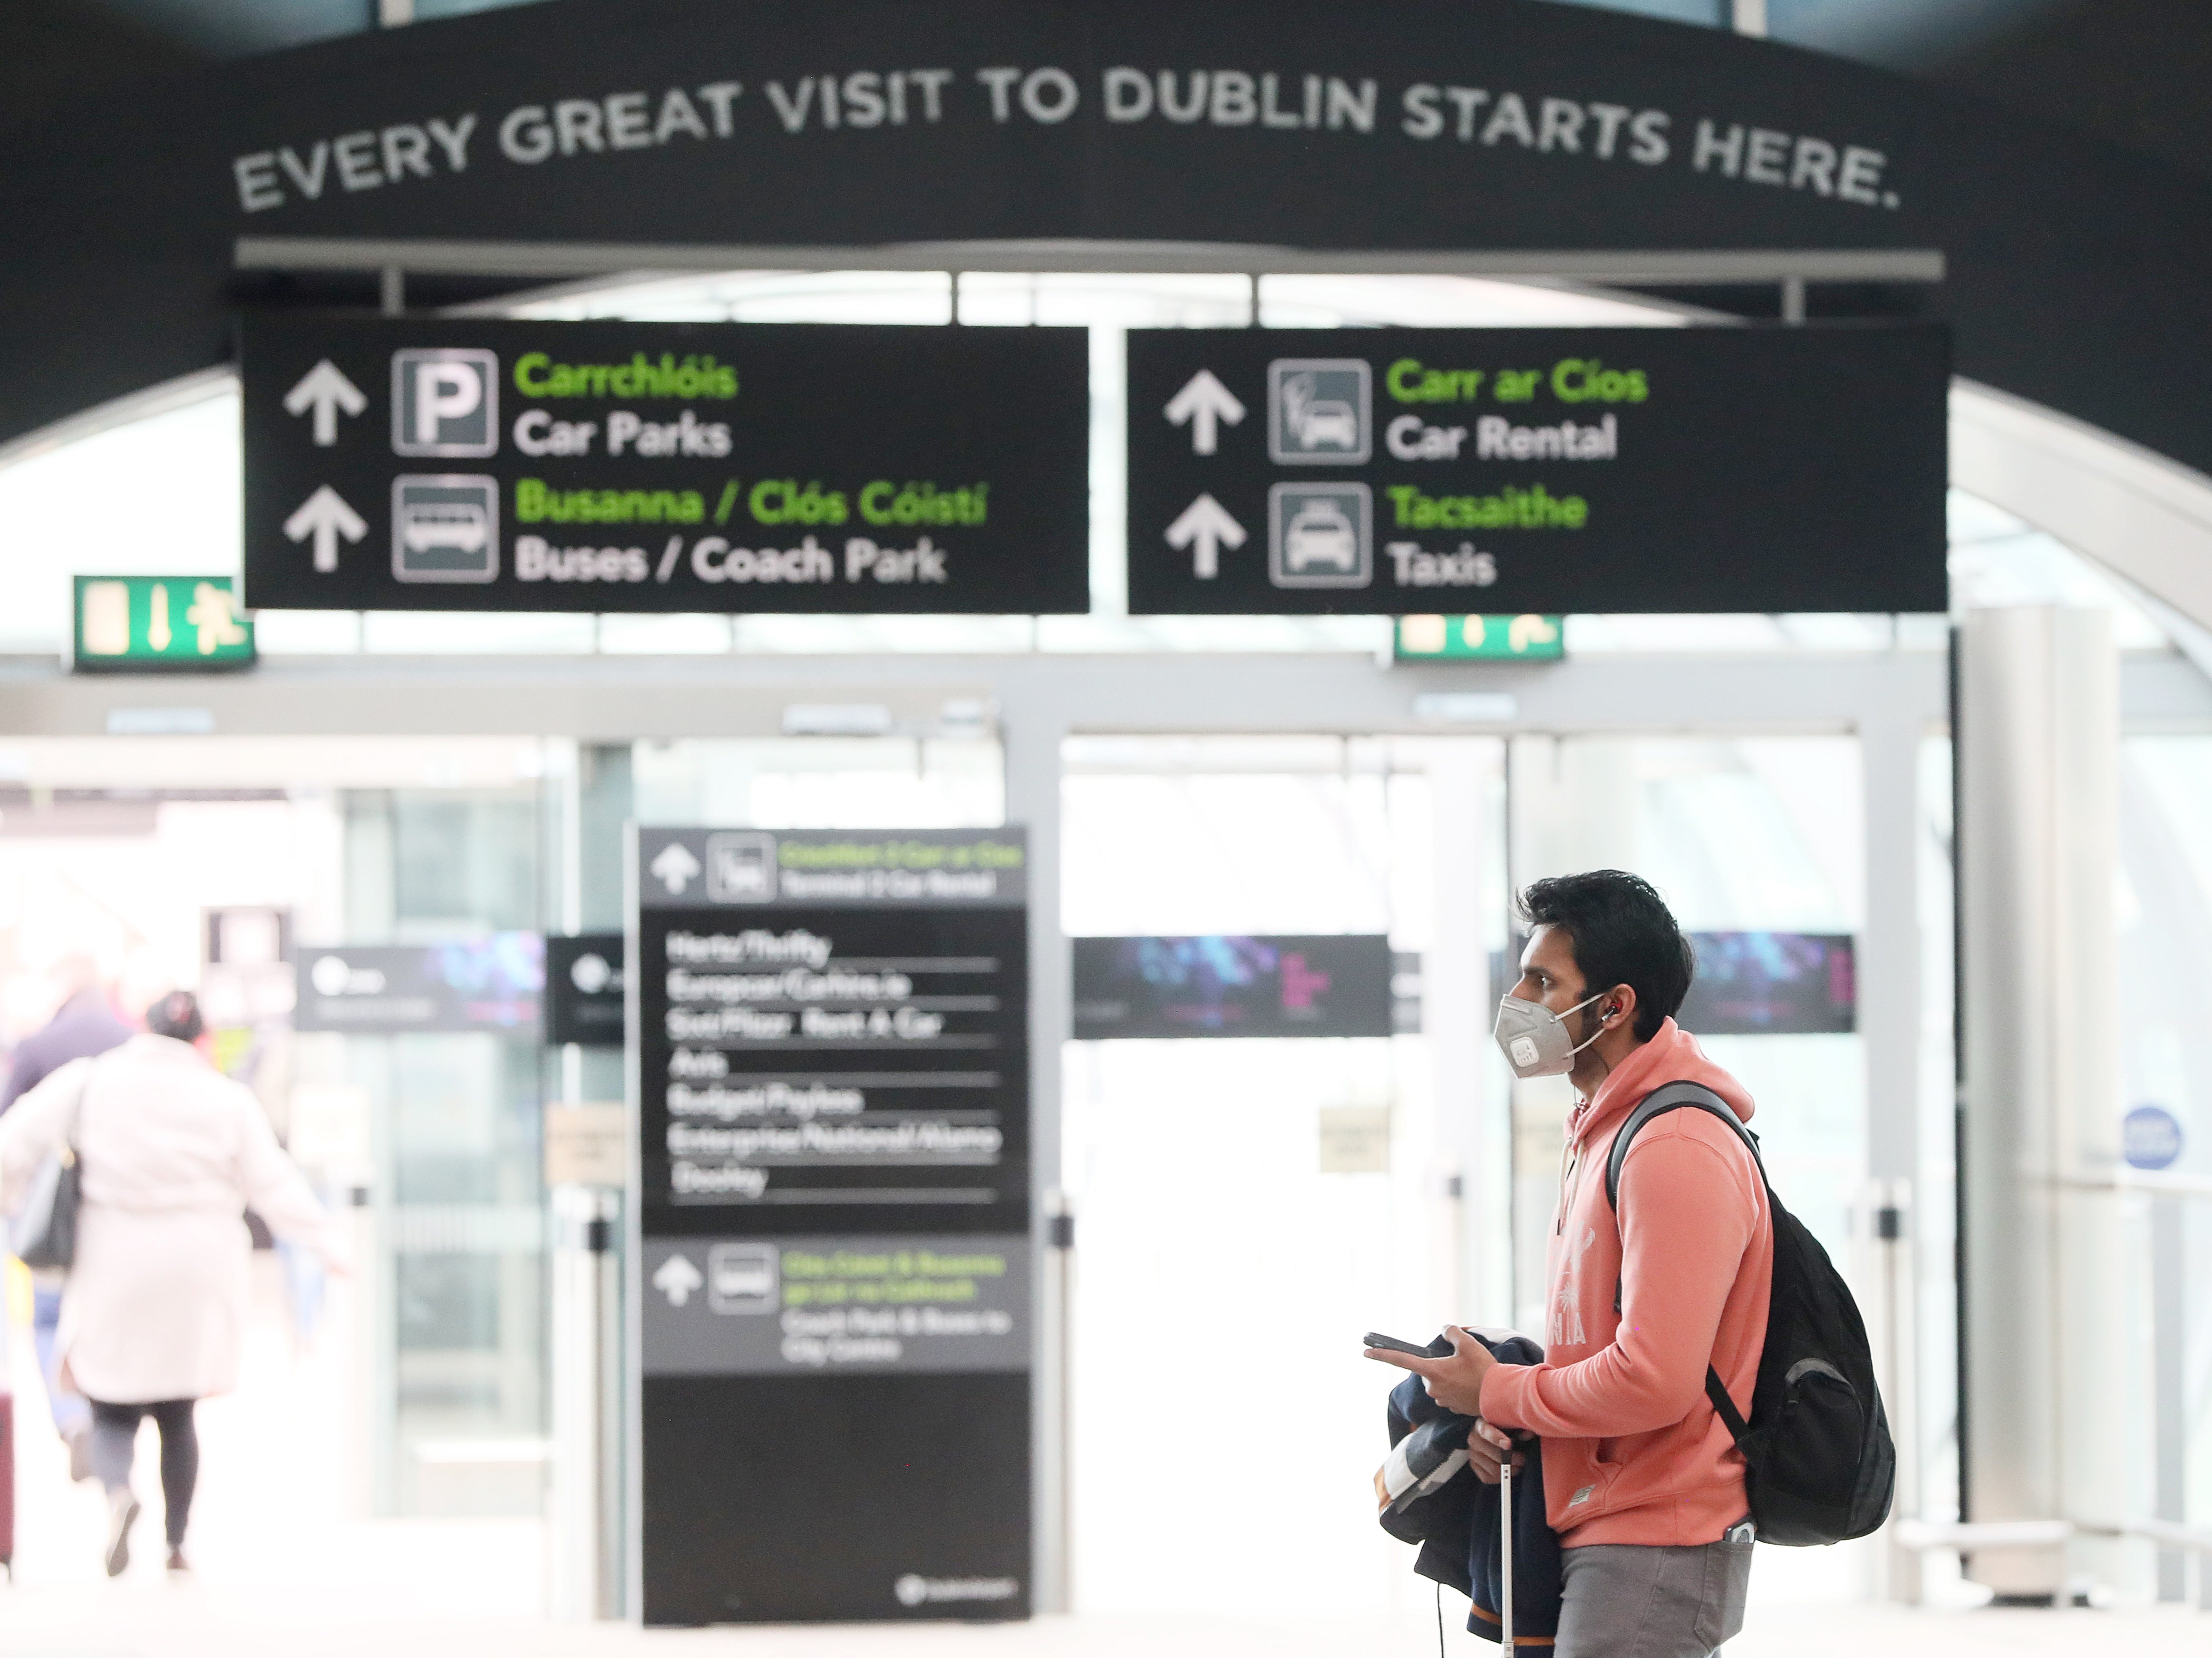 Travellers arriving in Ireland from Britain will be asked to present a negative Covid-19 test